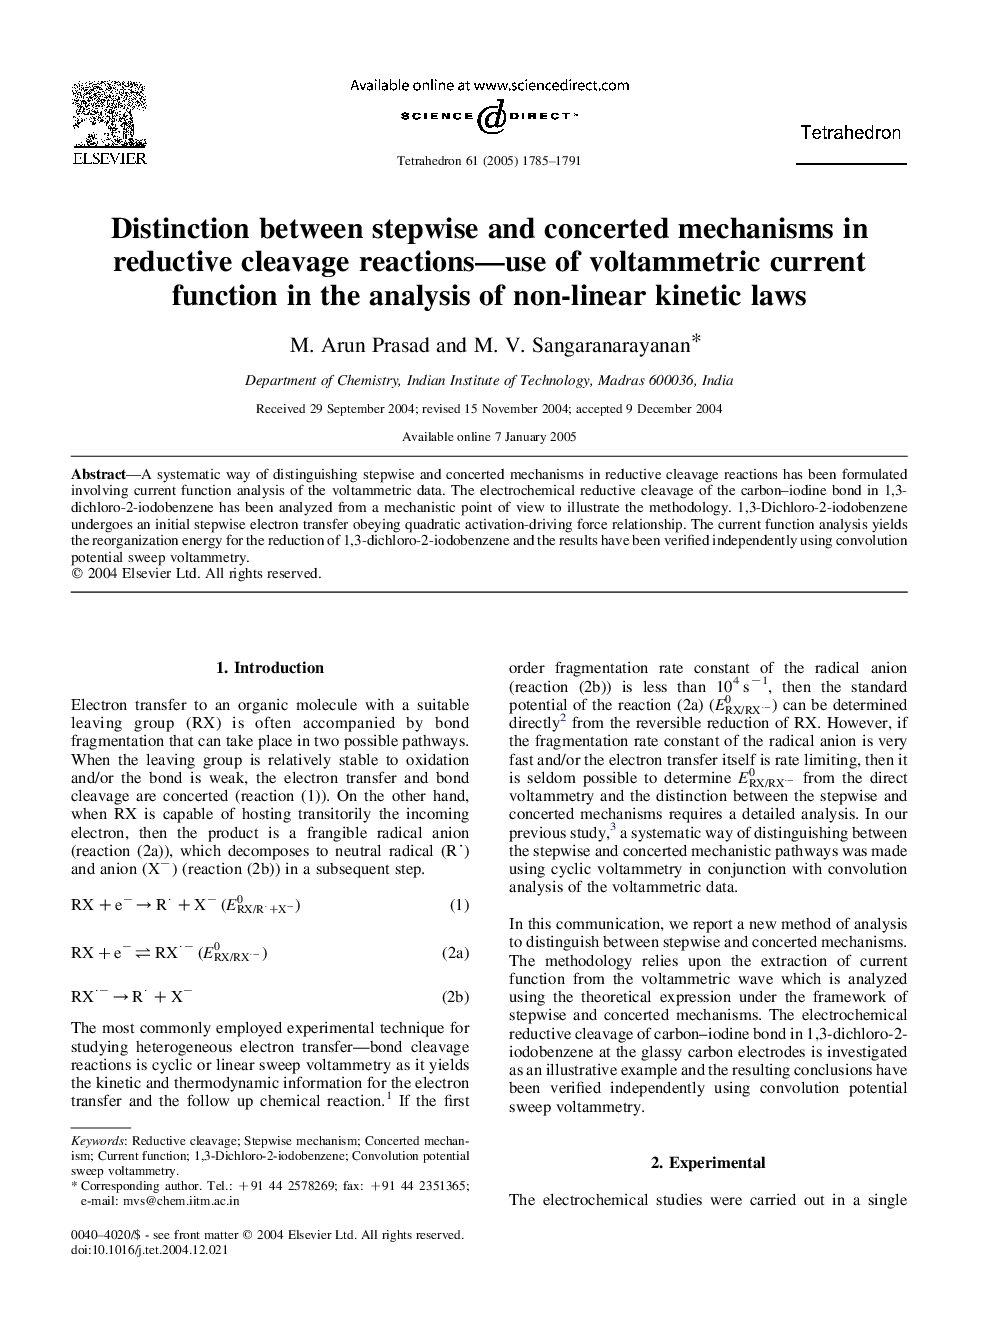 Distinction between stepwise and concerted mechanisms in reductive cleavage reactions-use of voltammetric current function in the analysis of non-linear kinetic laws